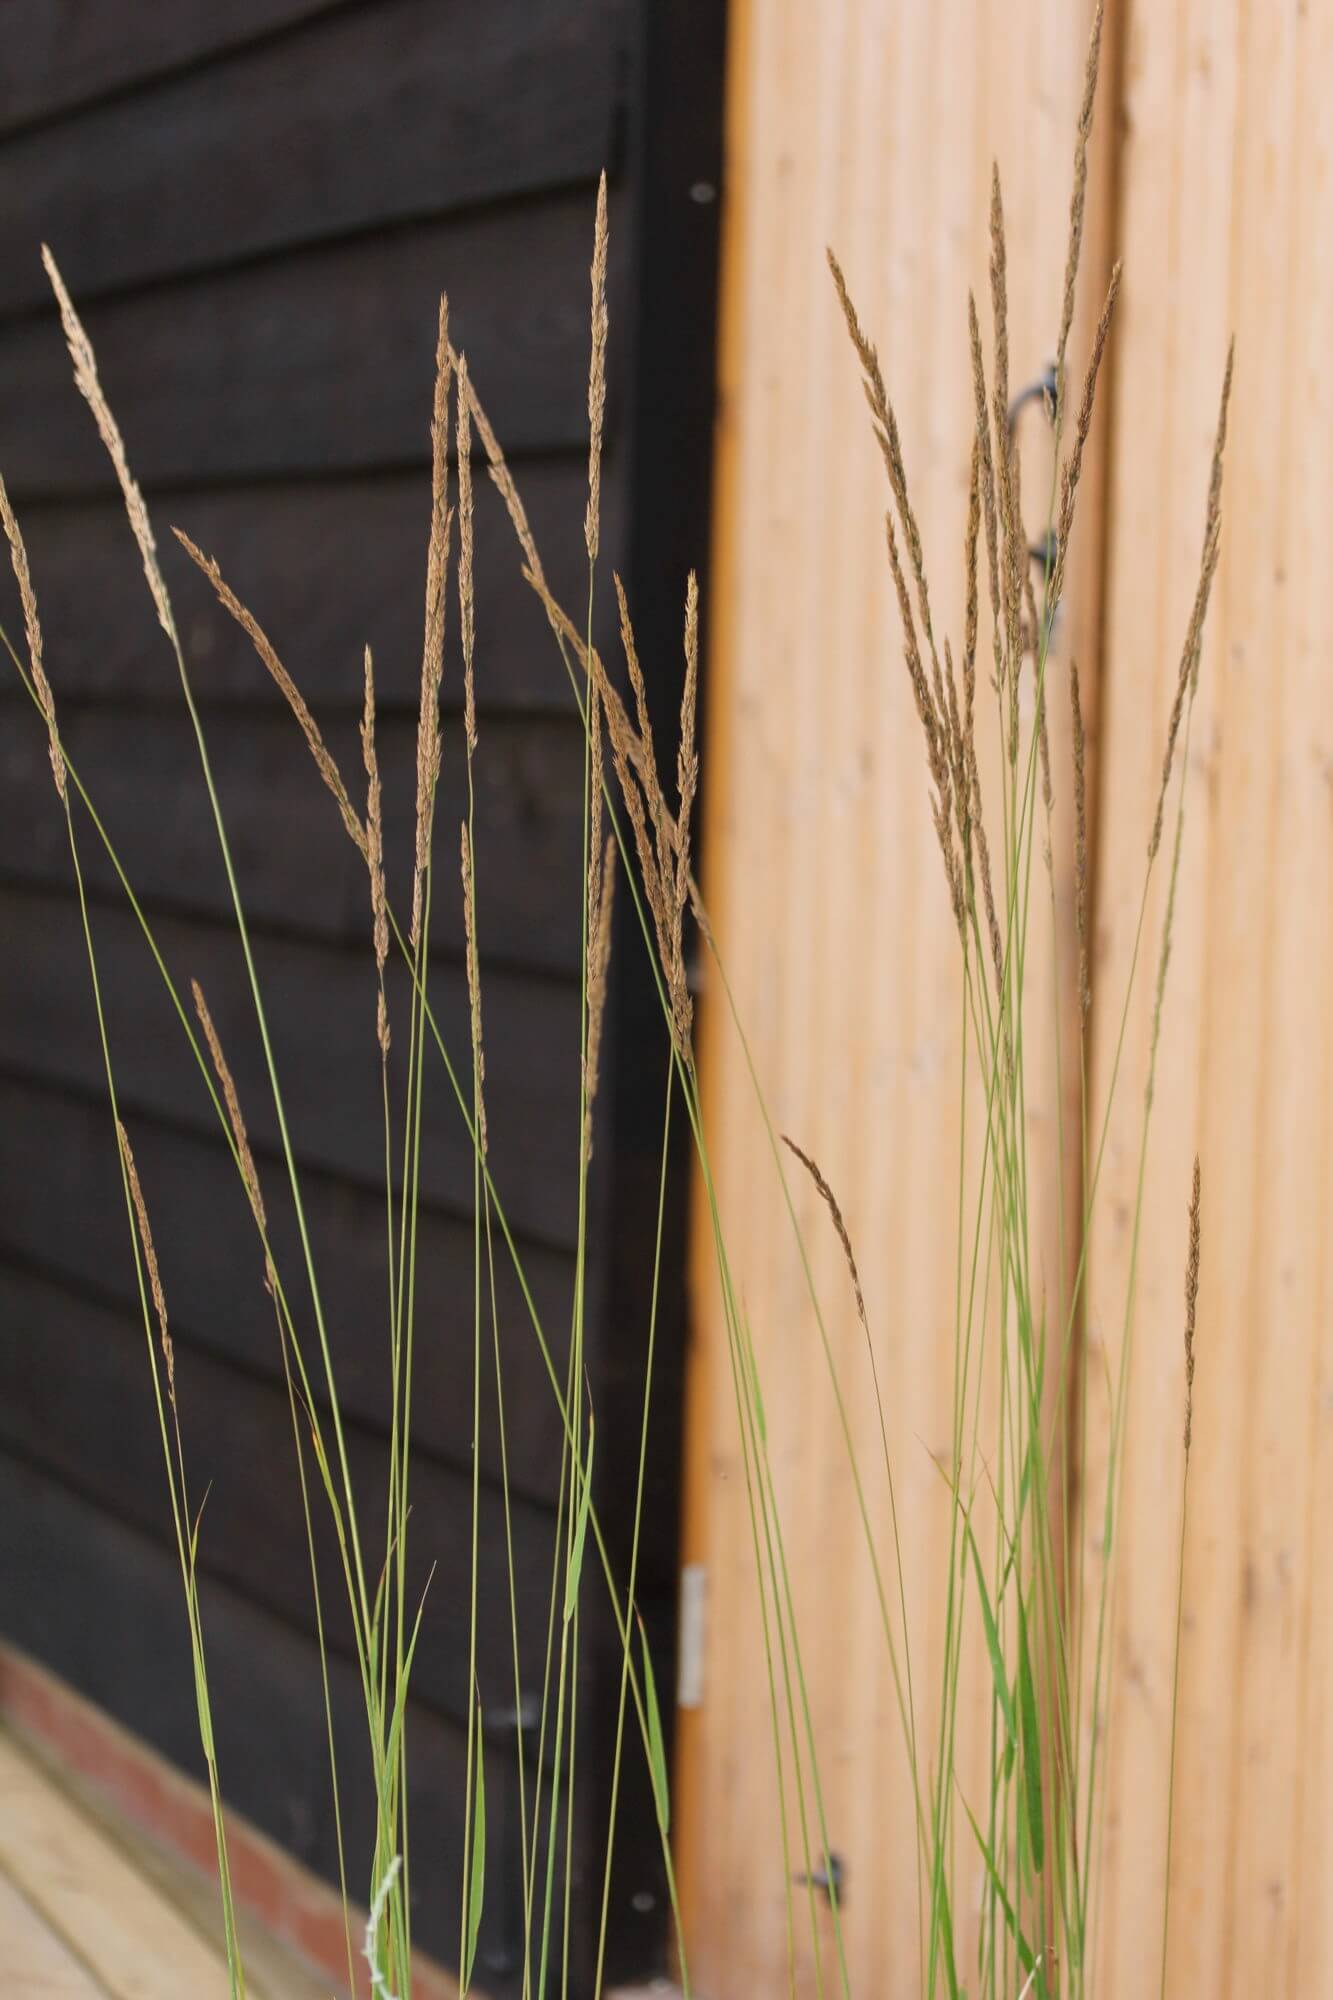 Fine feathery grasses growing in front of wooden cladded garden studio